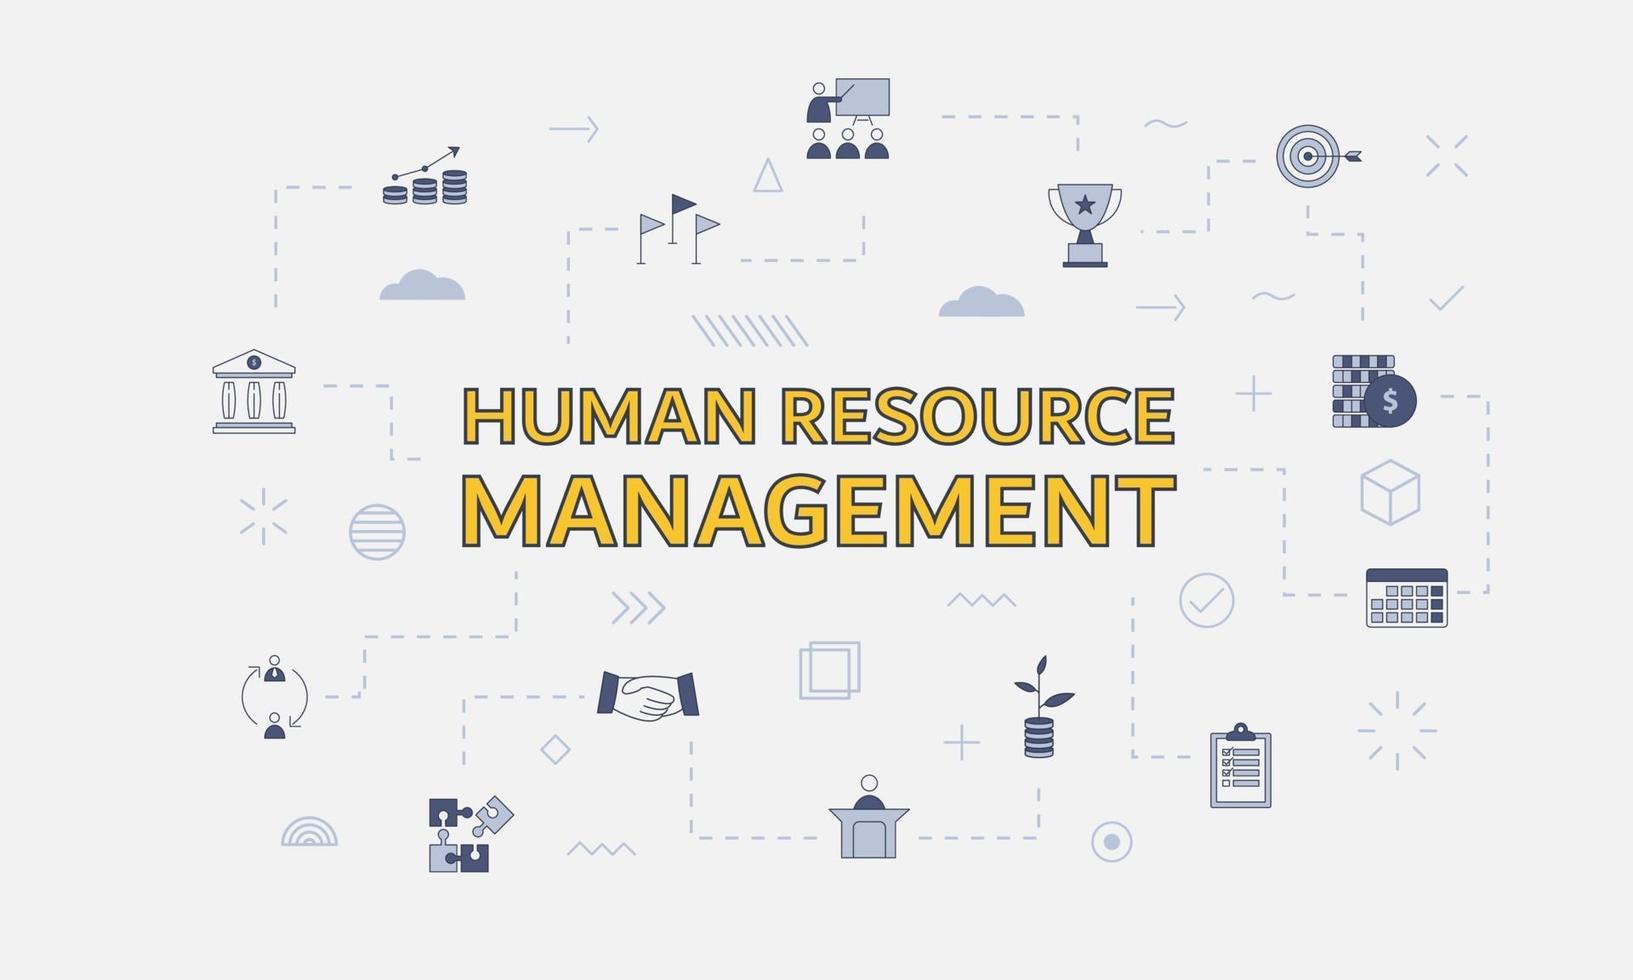 hrm human resource management concept with icon set vector